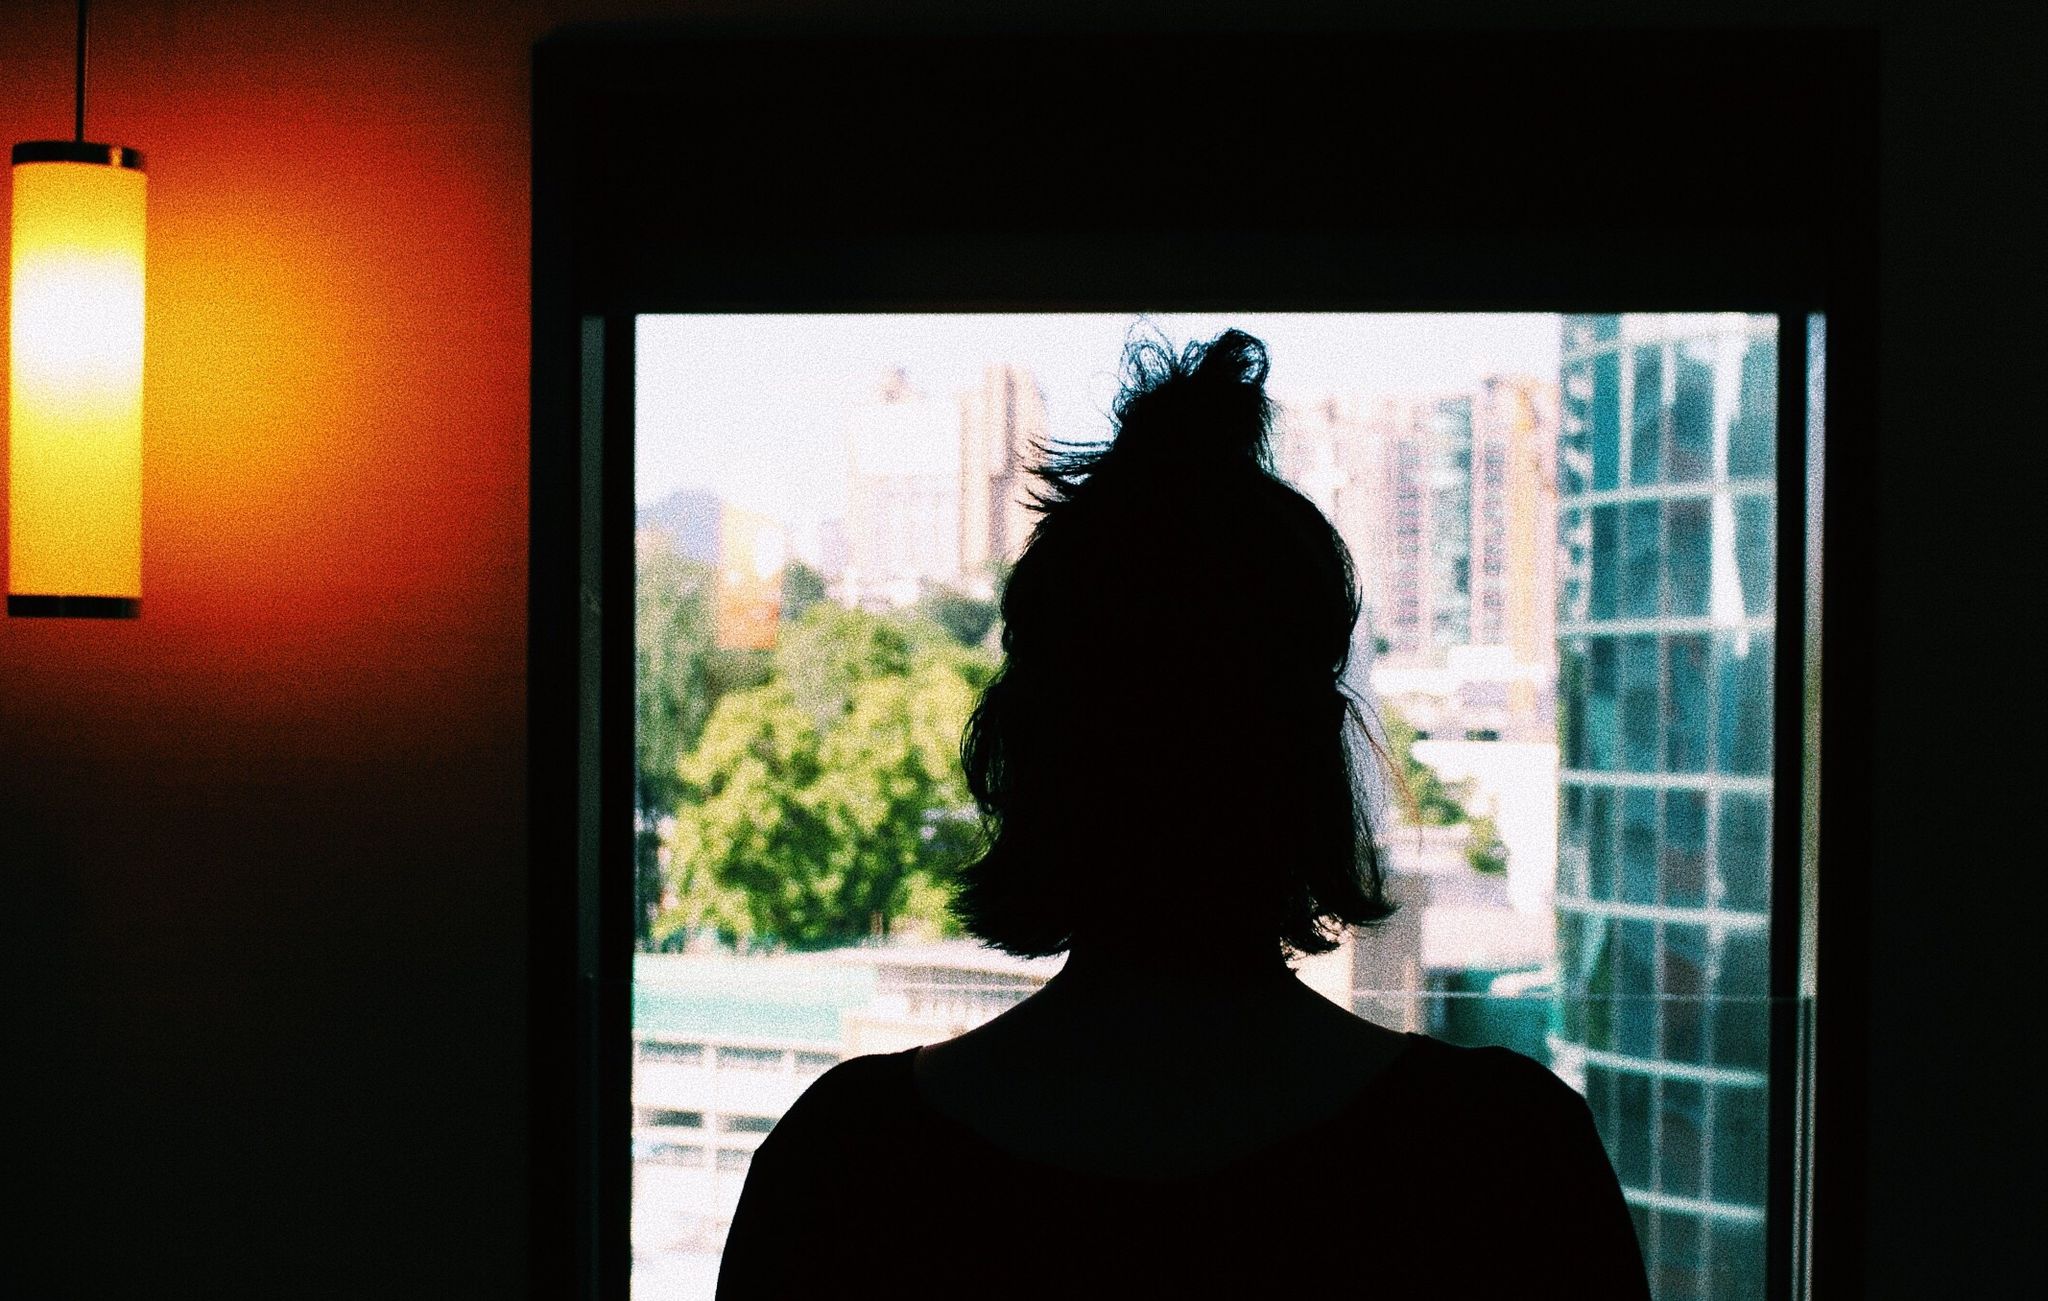 Rear View Of Silhouette Woman Looking Through Window